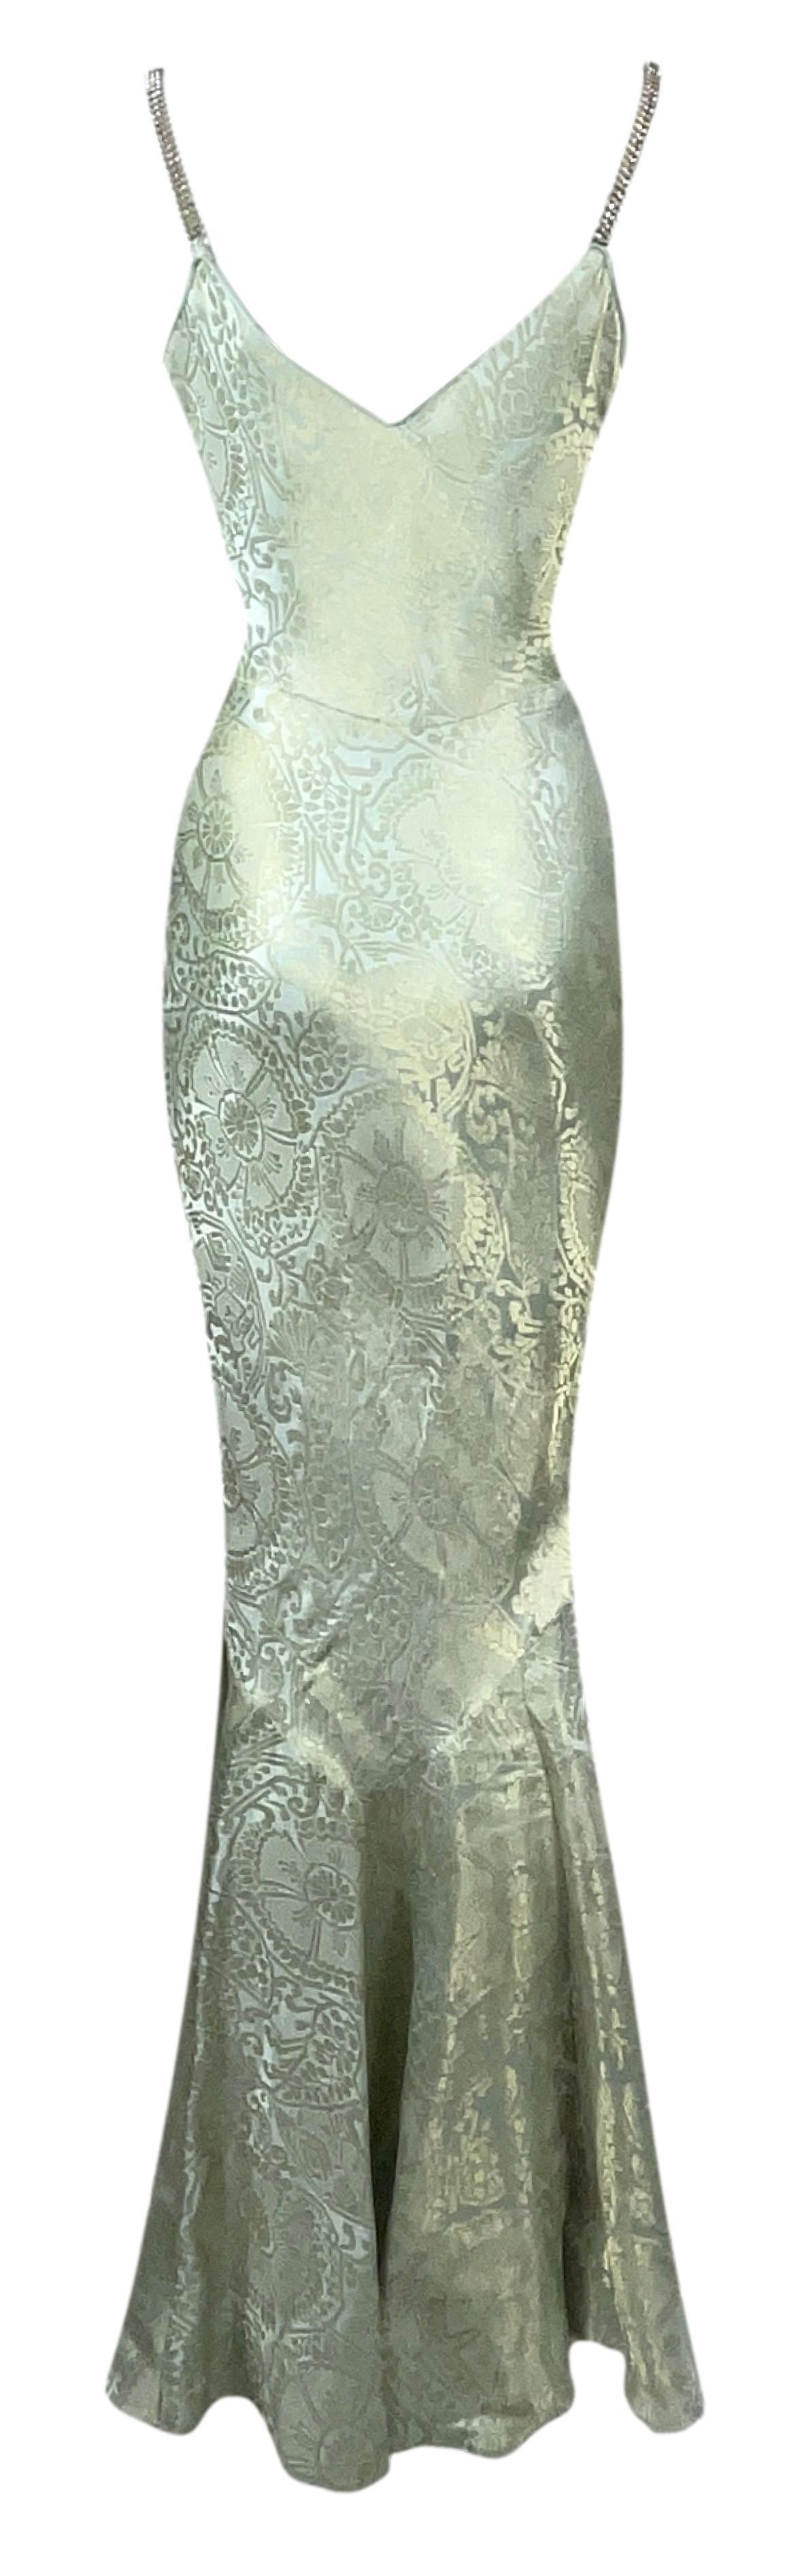 S/S 2001 John Galliano Mint Green & Gold Mermaid Gown Dress w Crystal Straps In Good Condition For Sale In Yukon, OK